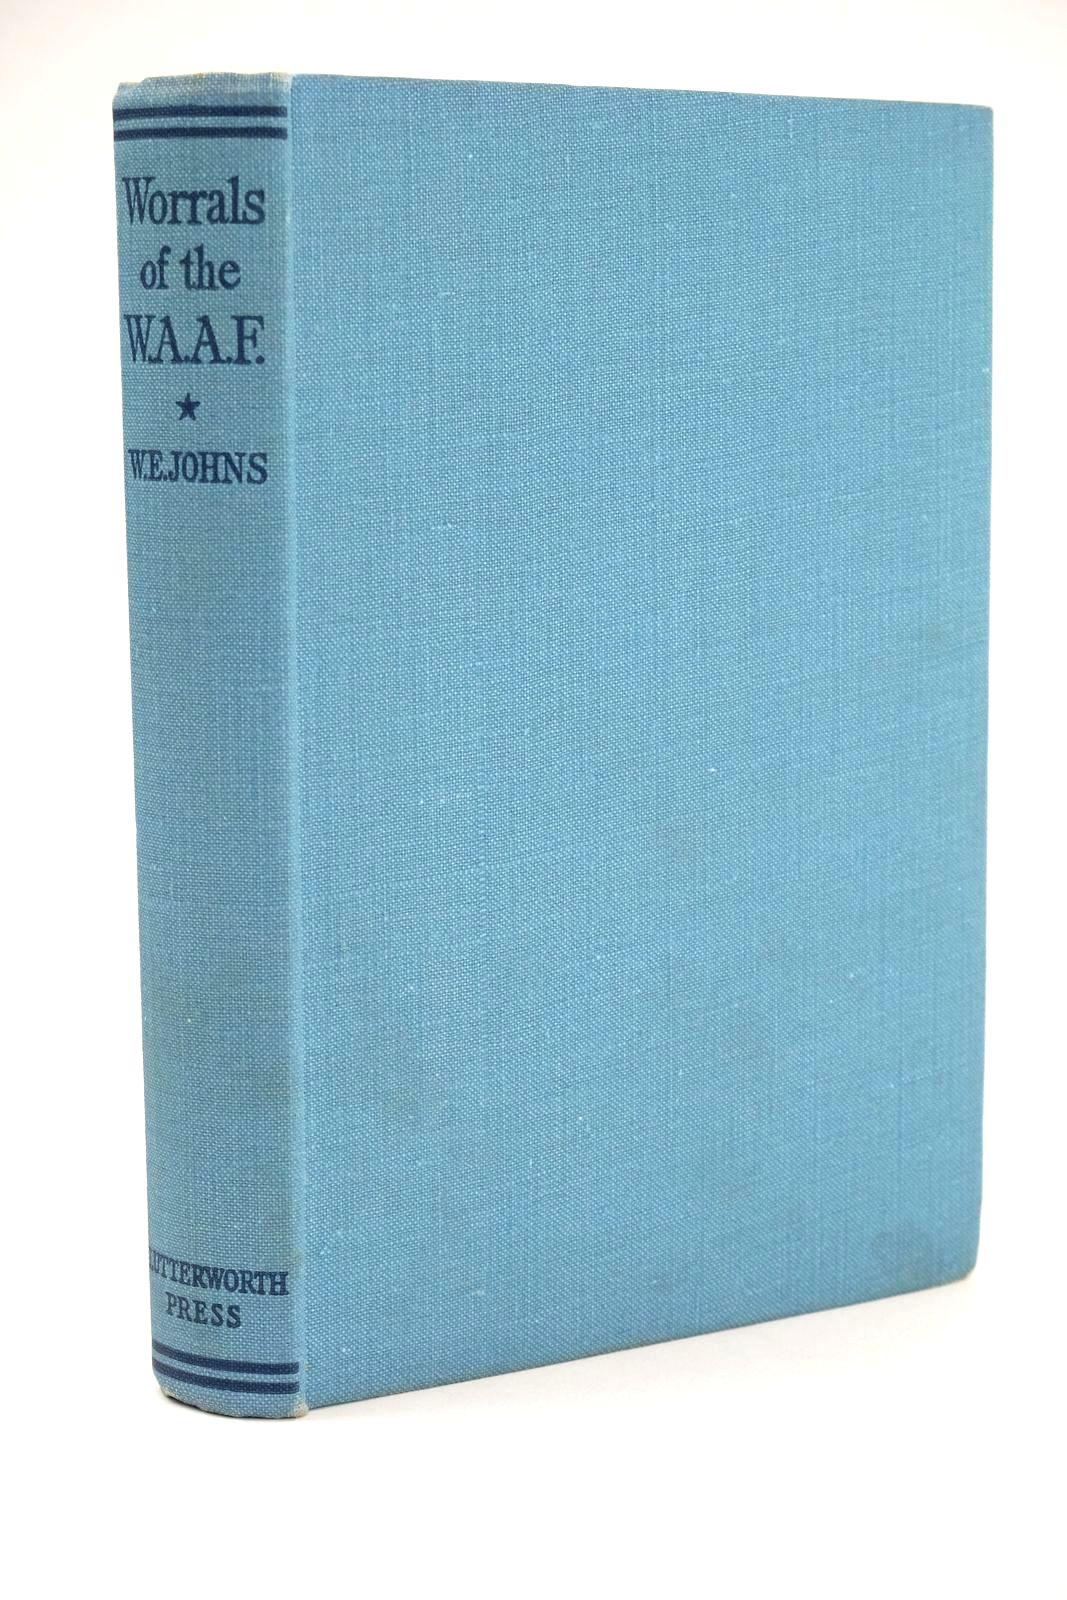 Photo of WORRALS OF THE W.A.A.F. written by Johns, W.E. published by Lutterworth Press (STOCK CODE: 1324494)  for sale by Stella & Rose's Books